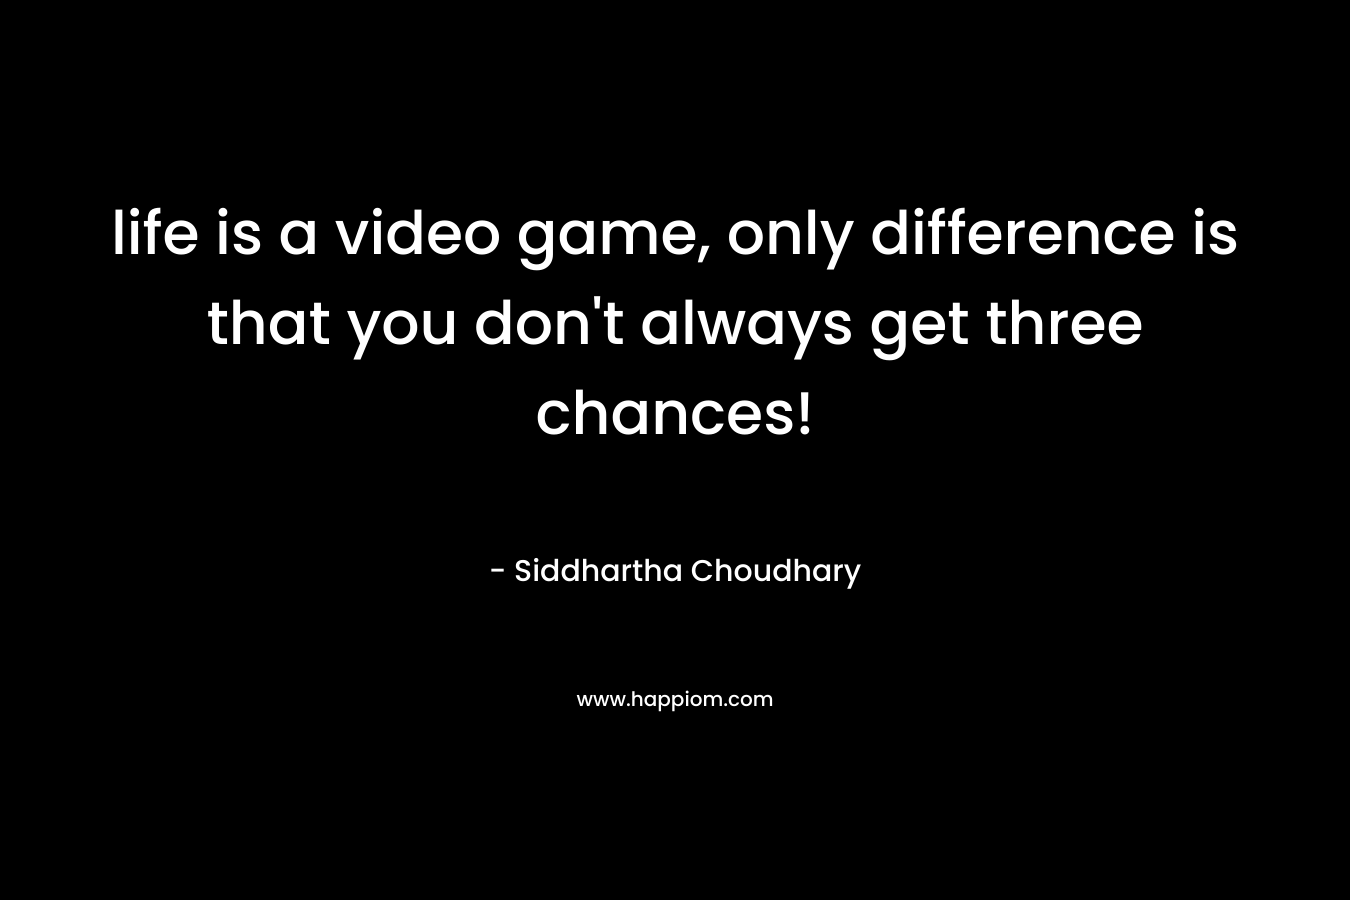 life is a video game, only difference is that you don't always get three chances!